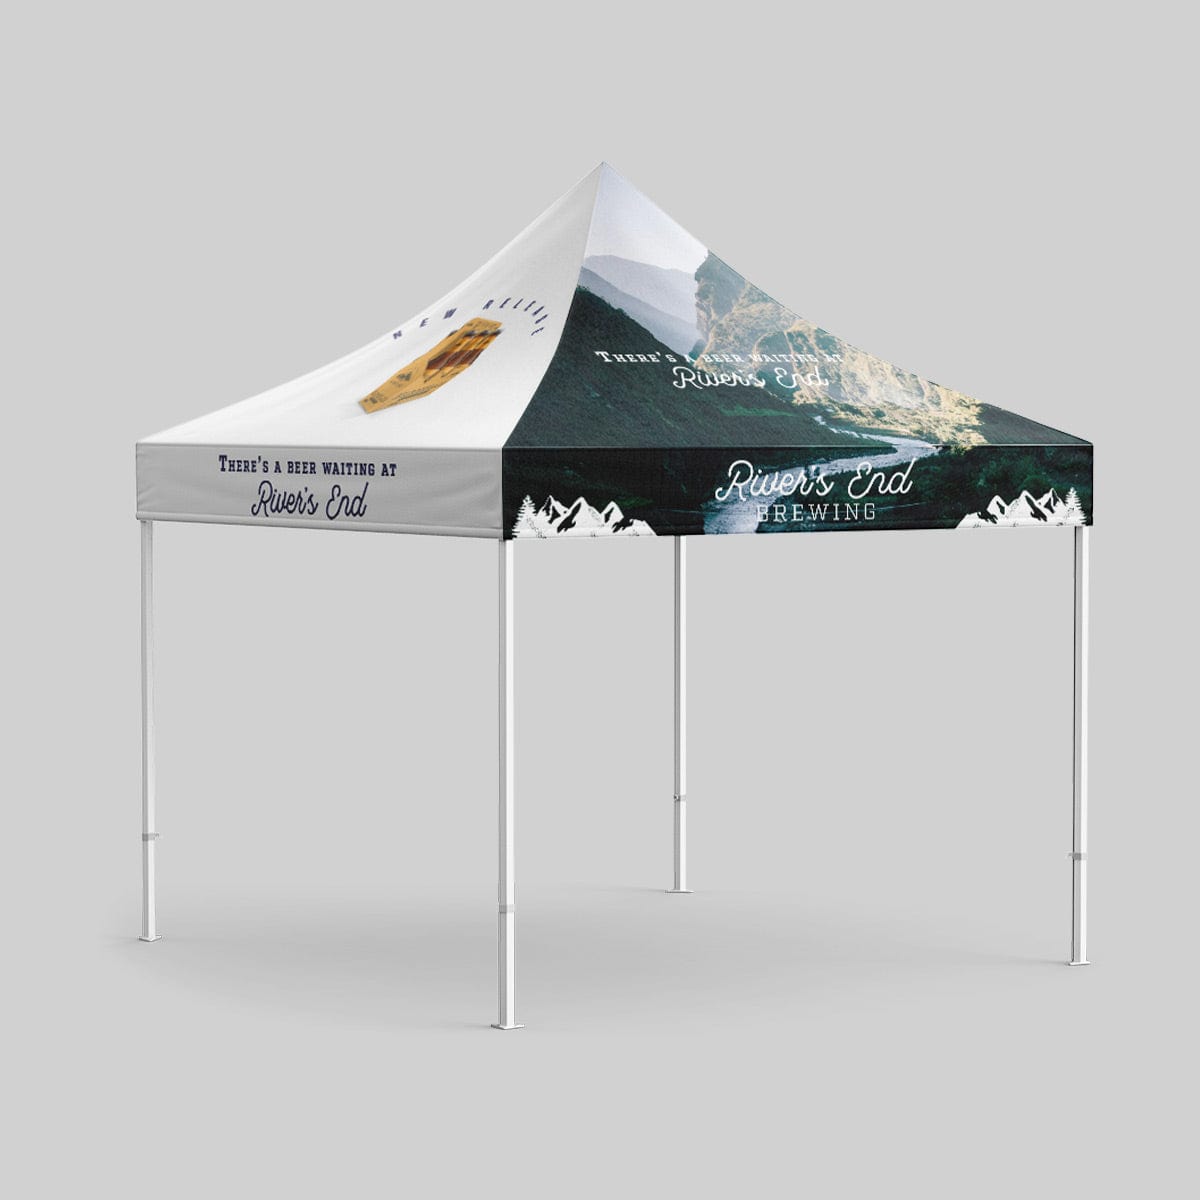 Professional Tent, canopy, table cover, feather flag and backdrop banners